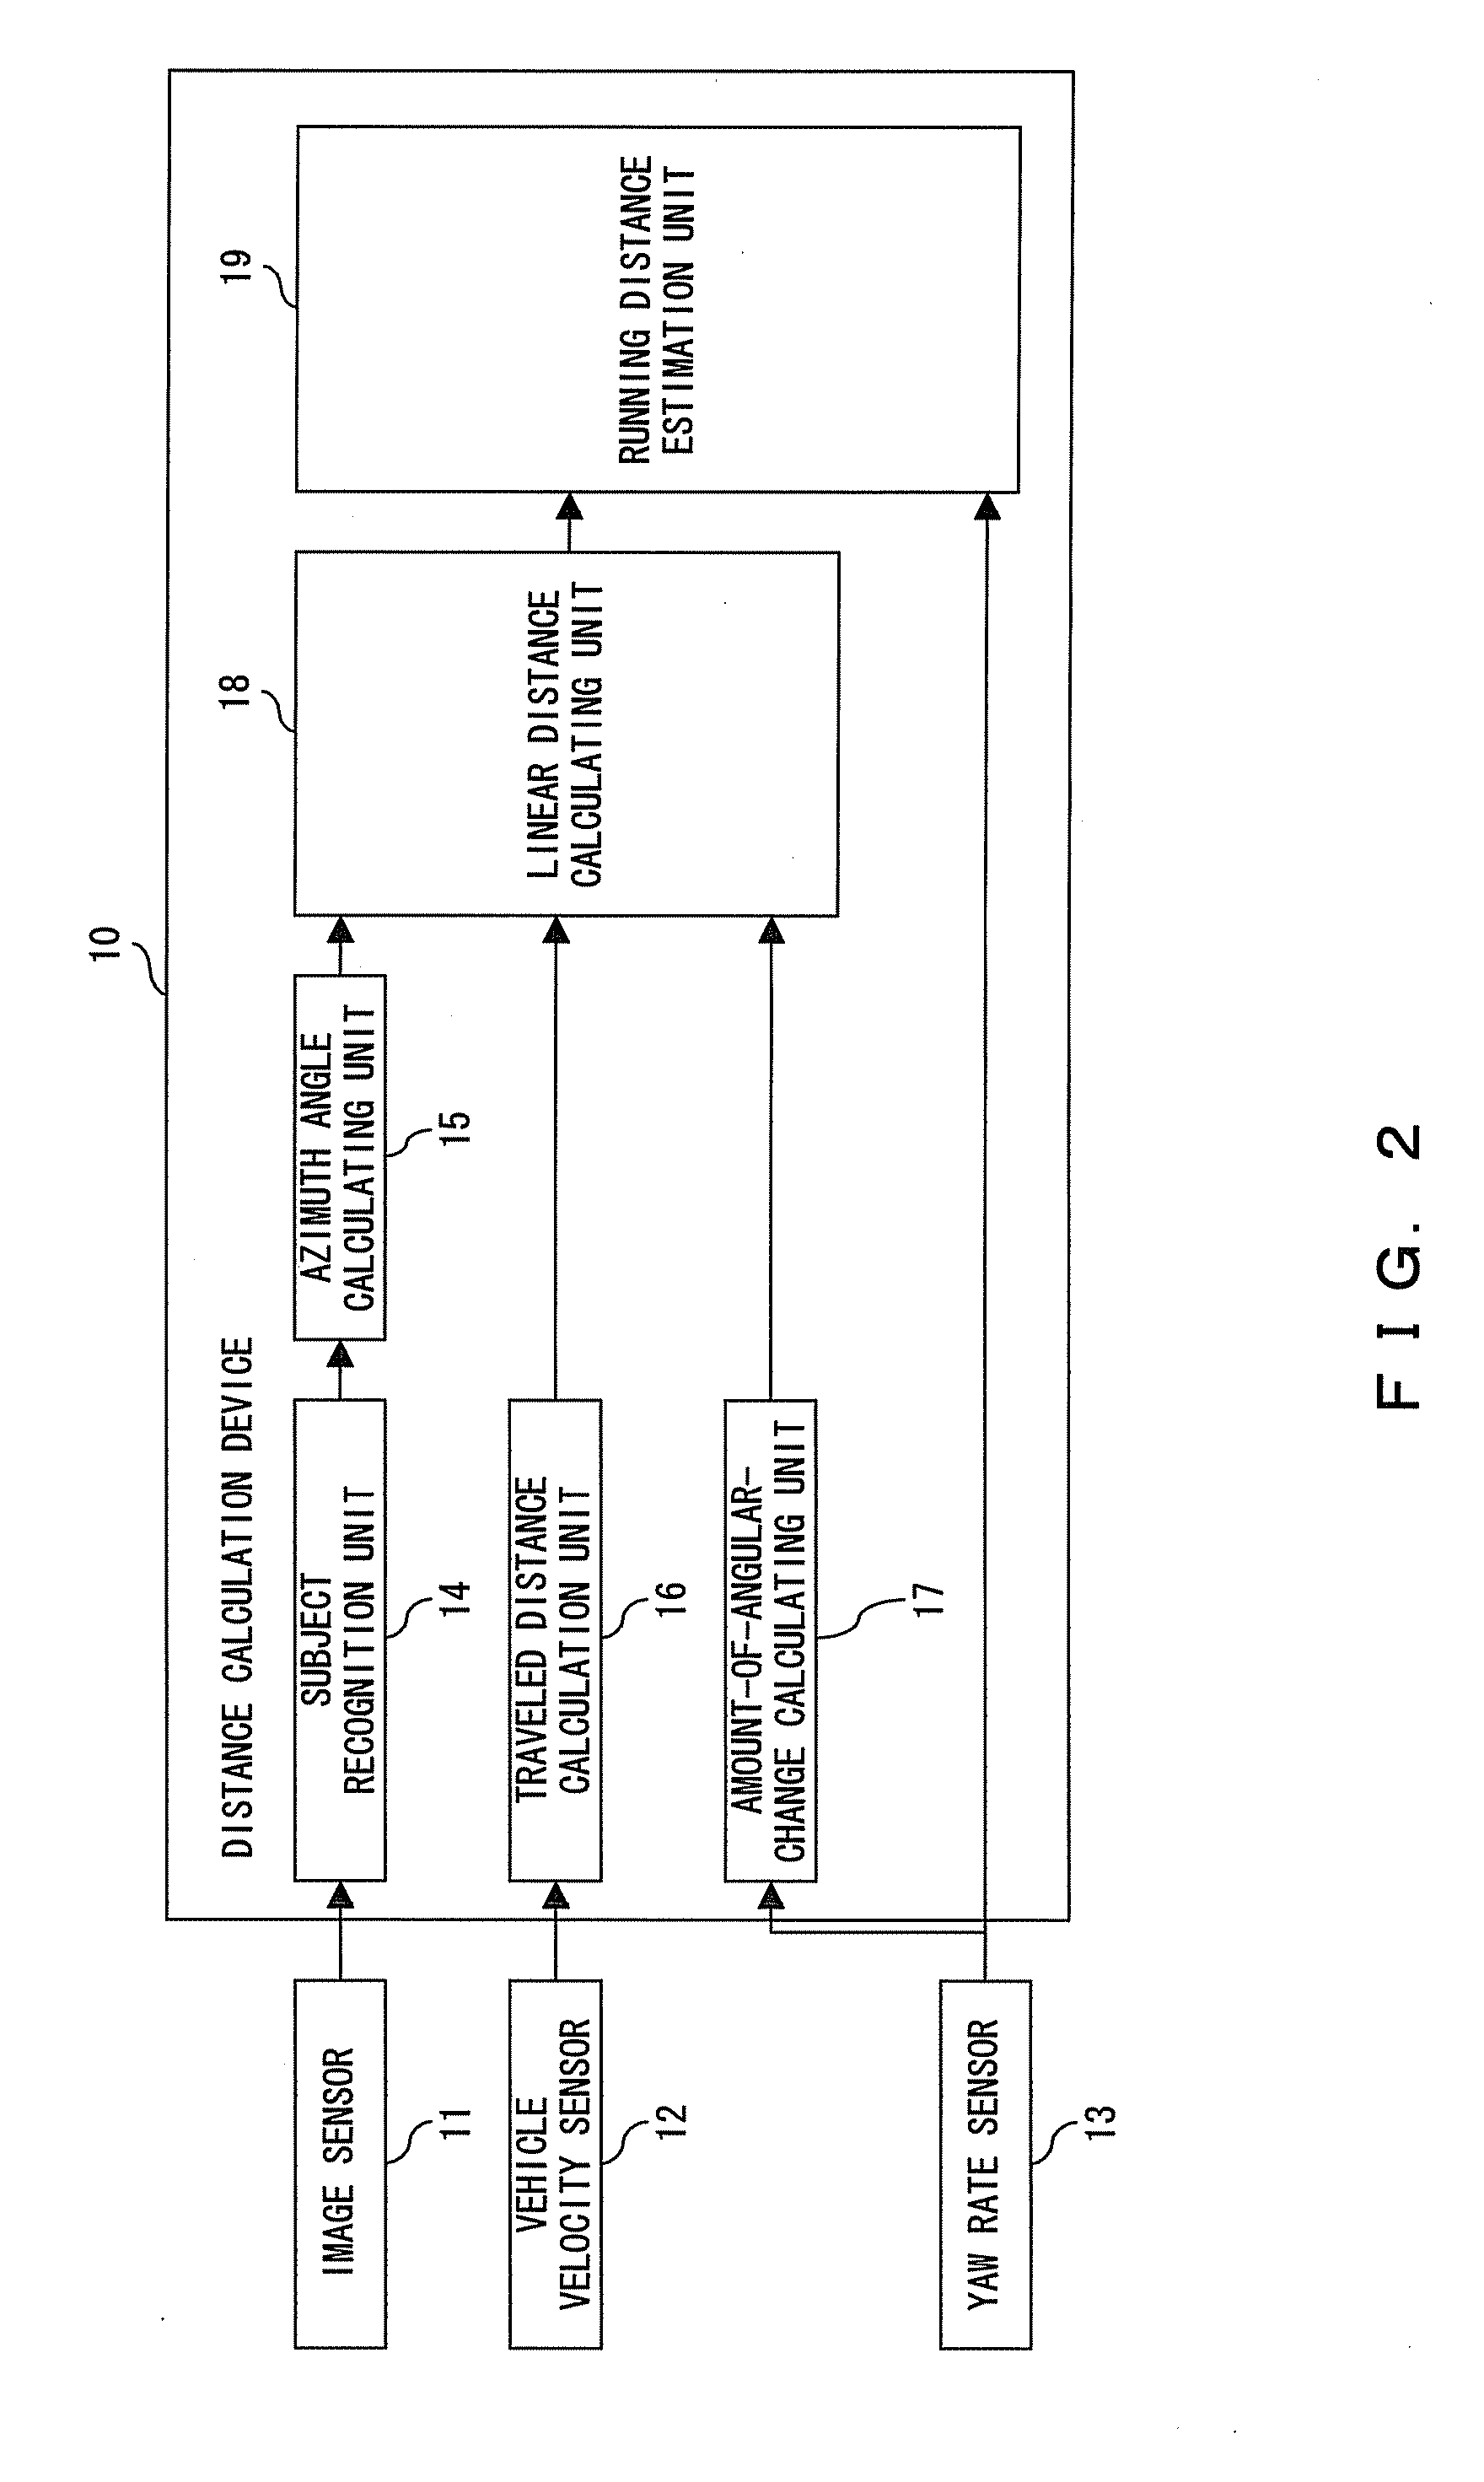 Distance calculation device and calculation program